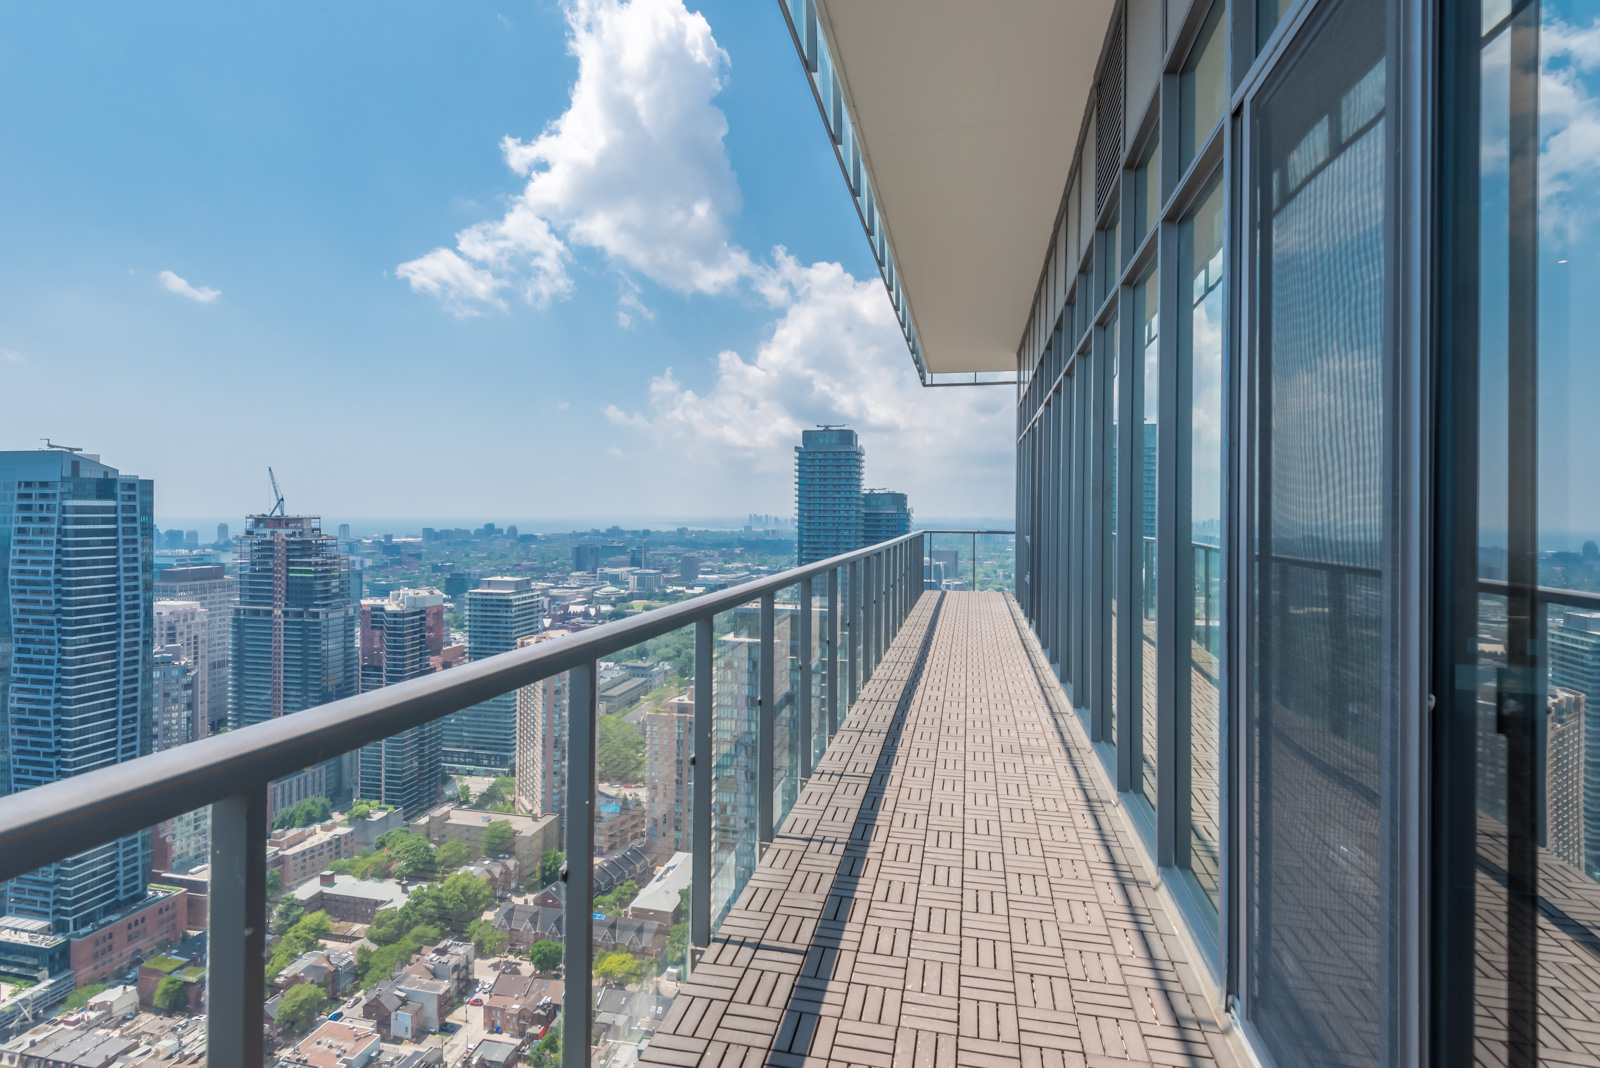 Image of balcony: it's so long and shows a rather lovely view of Toronto.